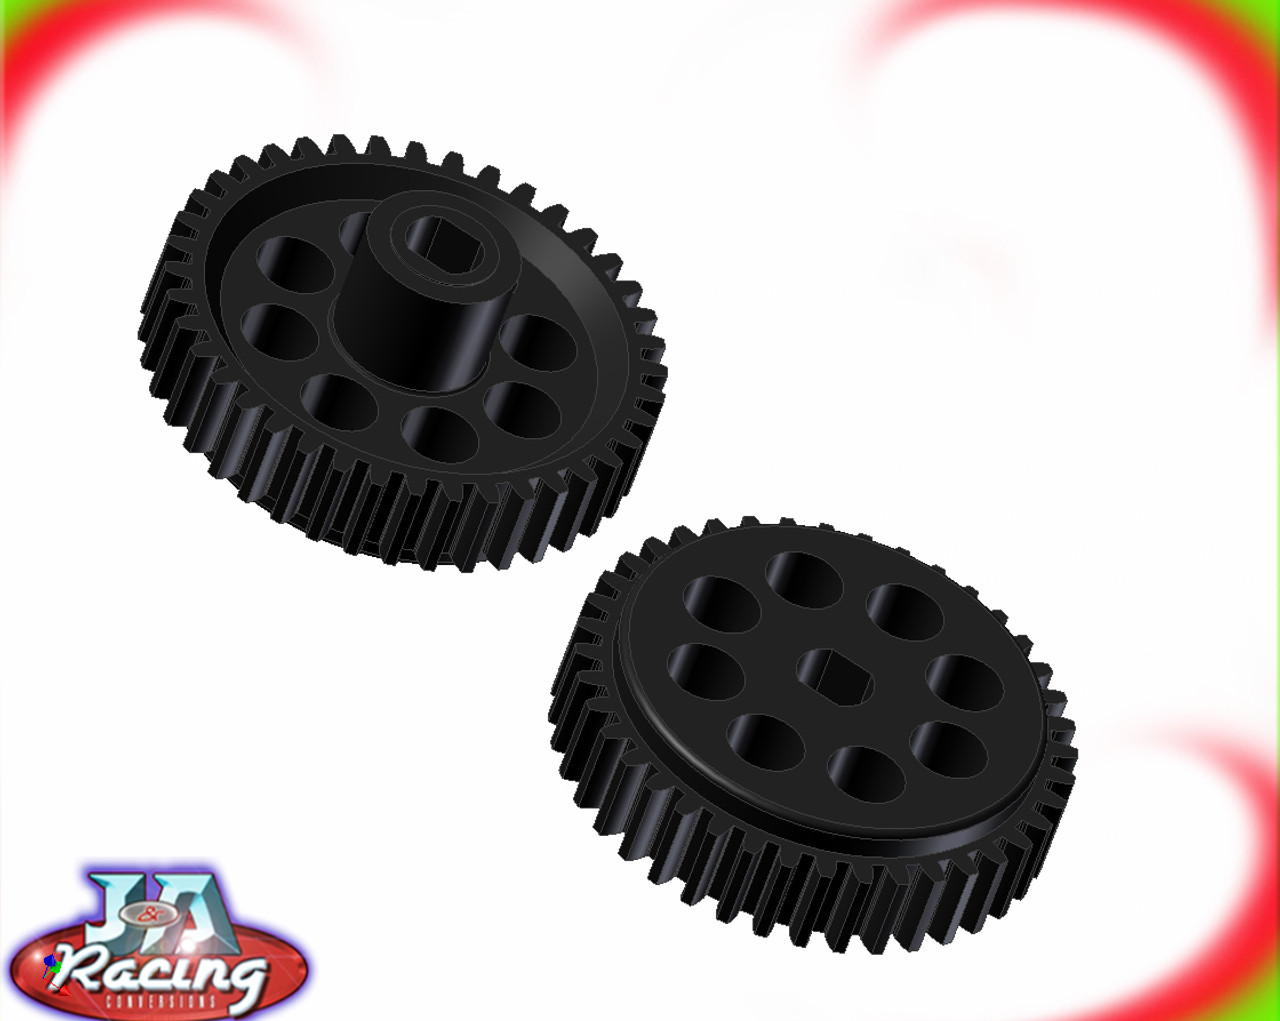 1/5 Scale FG 40 tooth Drive Gear SPECIAL OFFER!!